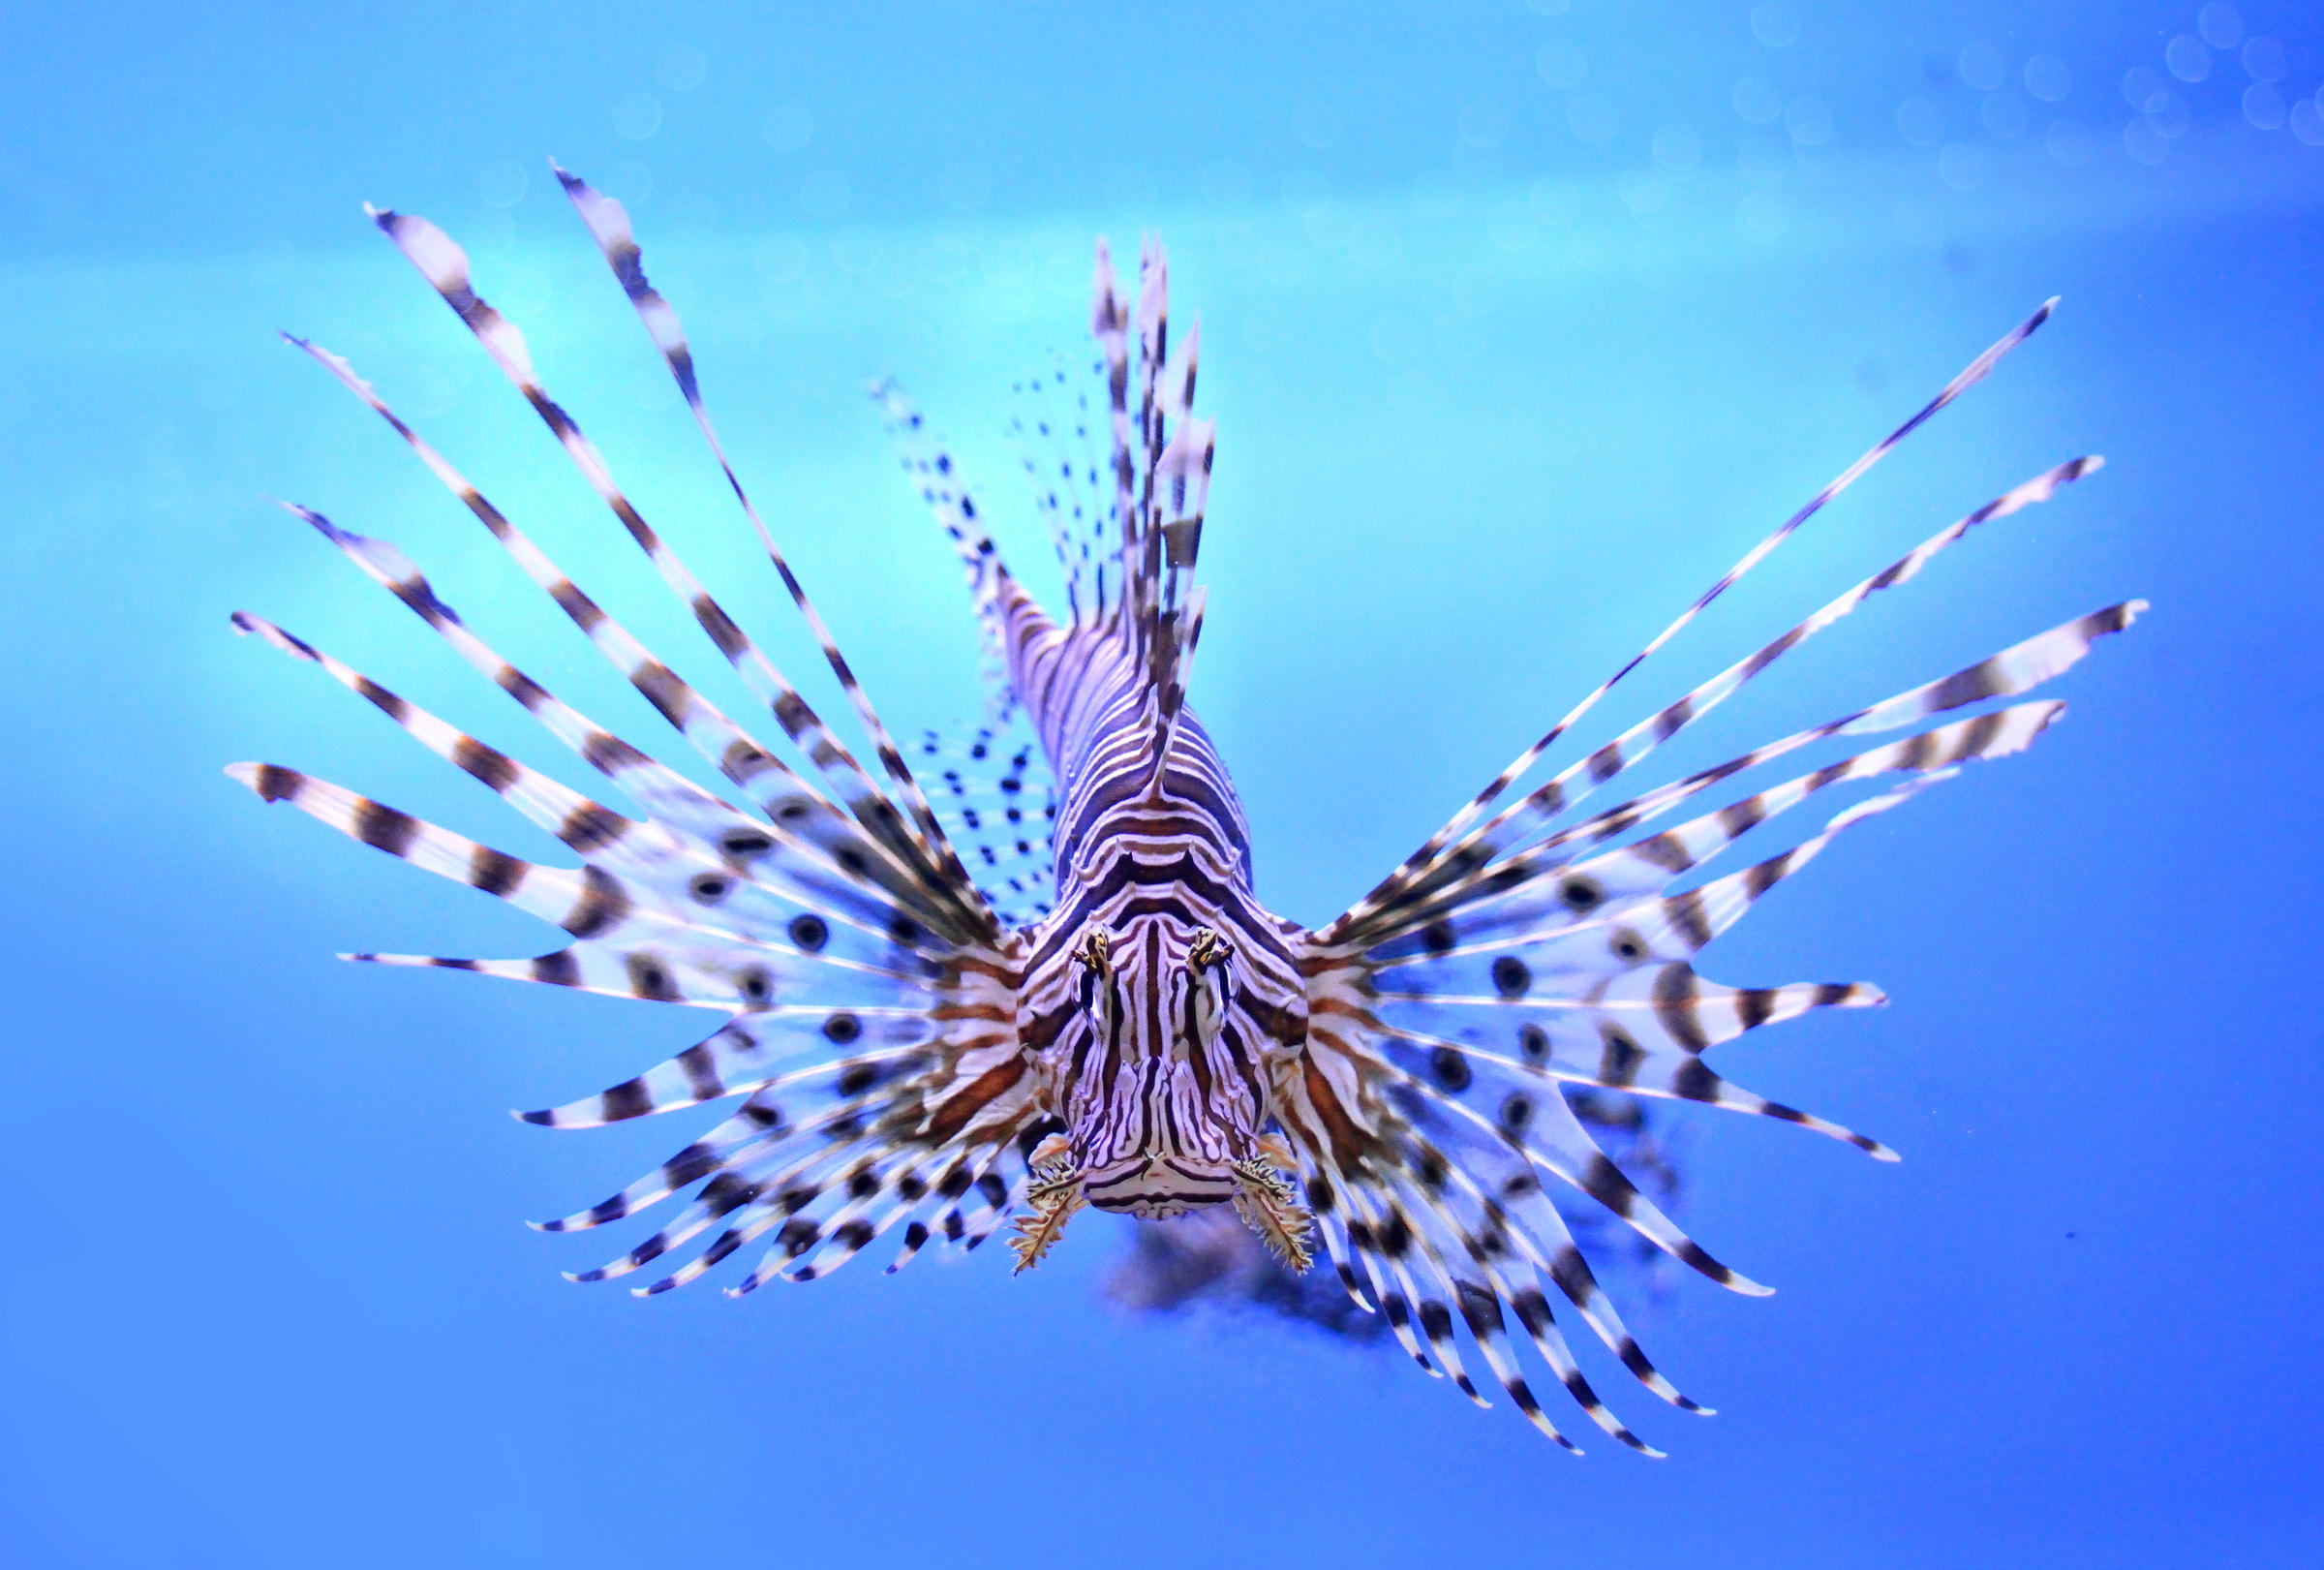 Who Wants To Eat Lionfish? A New UWF Course Centers On Marketing ...